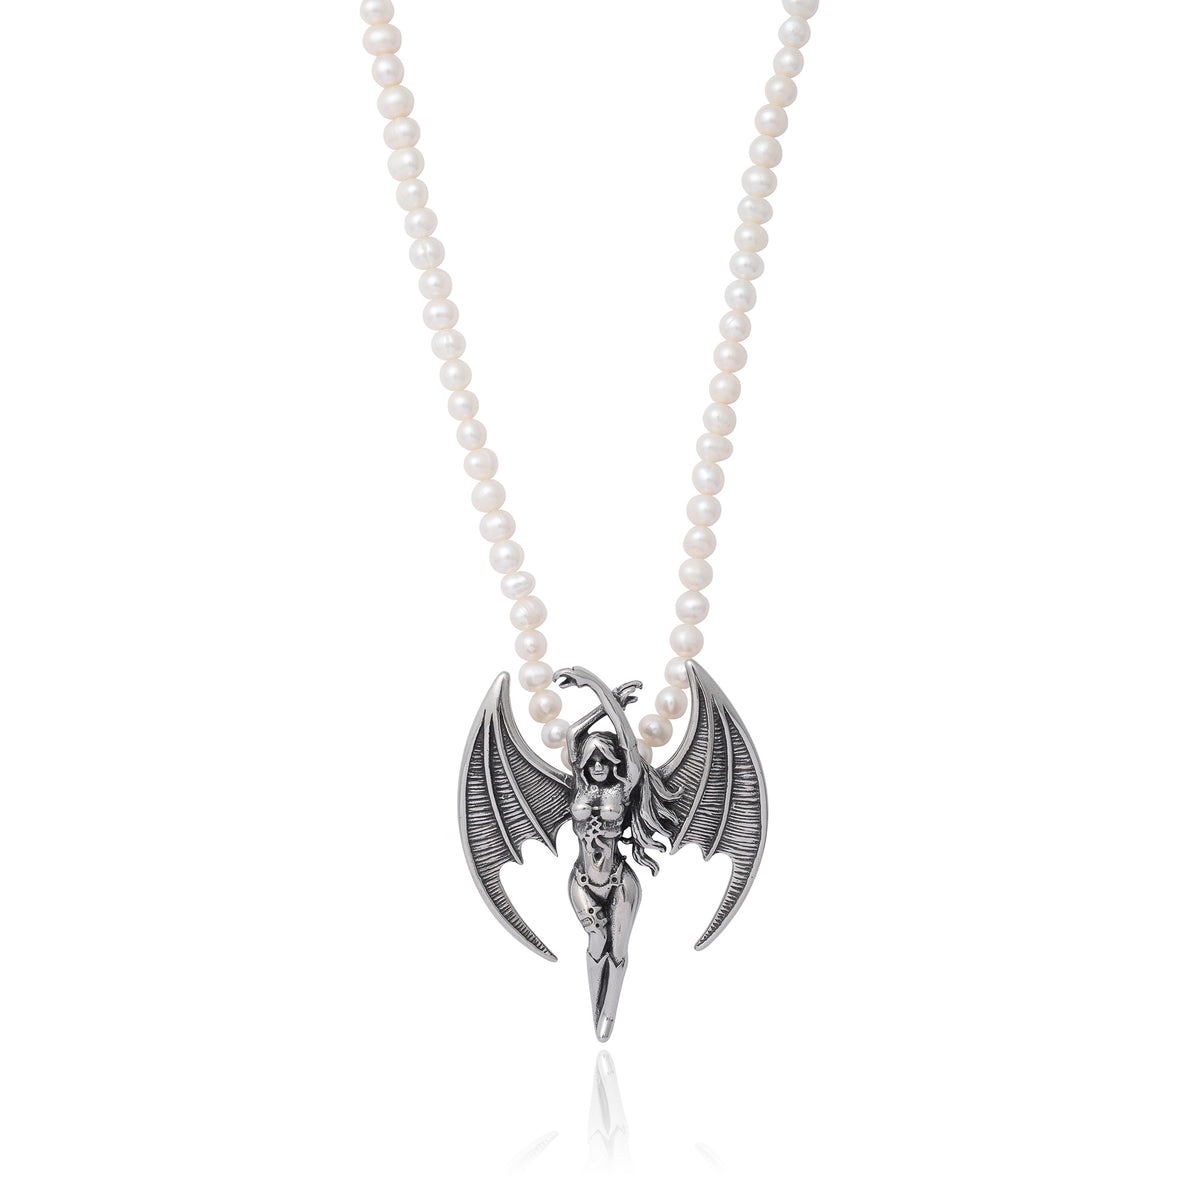 real pearl necklace with winged pendant